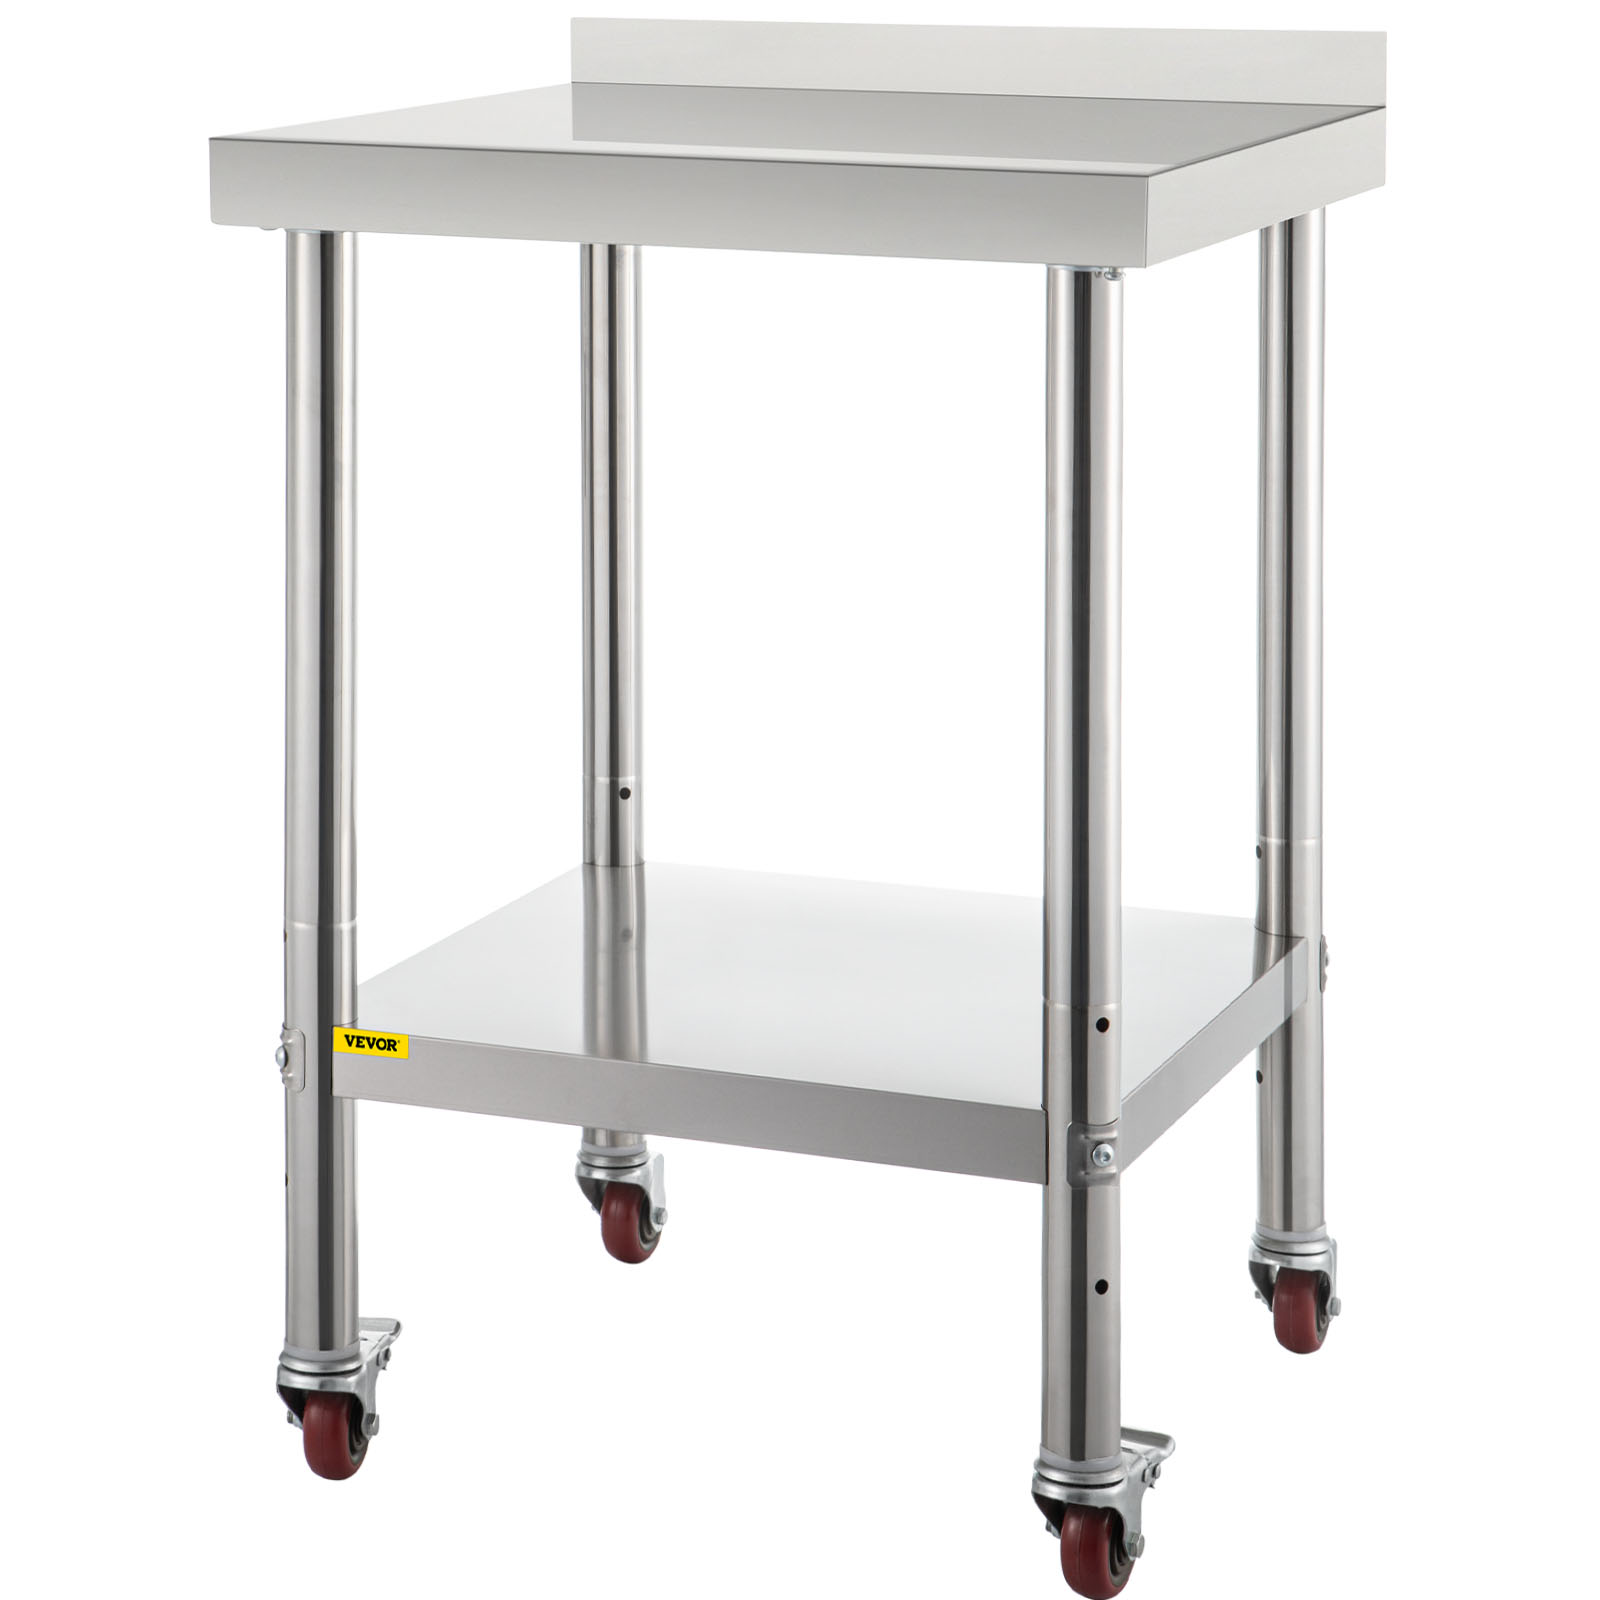 VEVOR Stainless Steel Work Prep Table Kitchen Work Table 24x24in w/ 4 Casters от Vevor Many GEOs